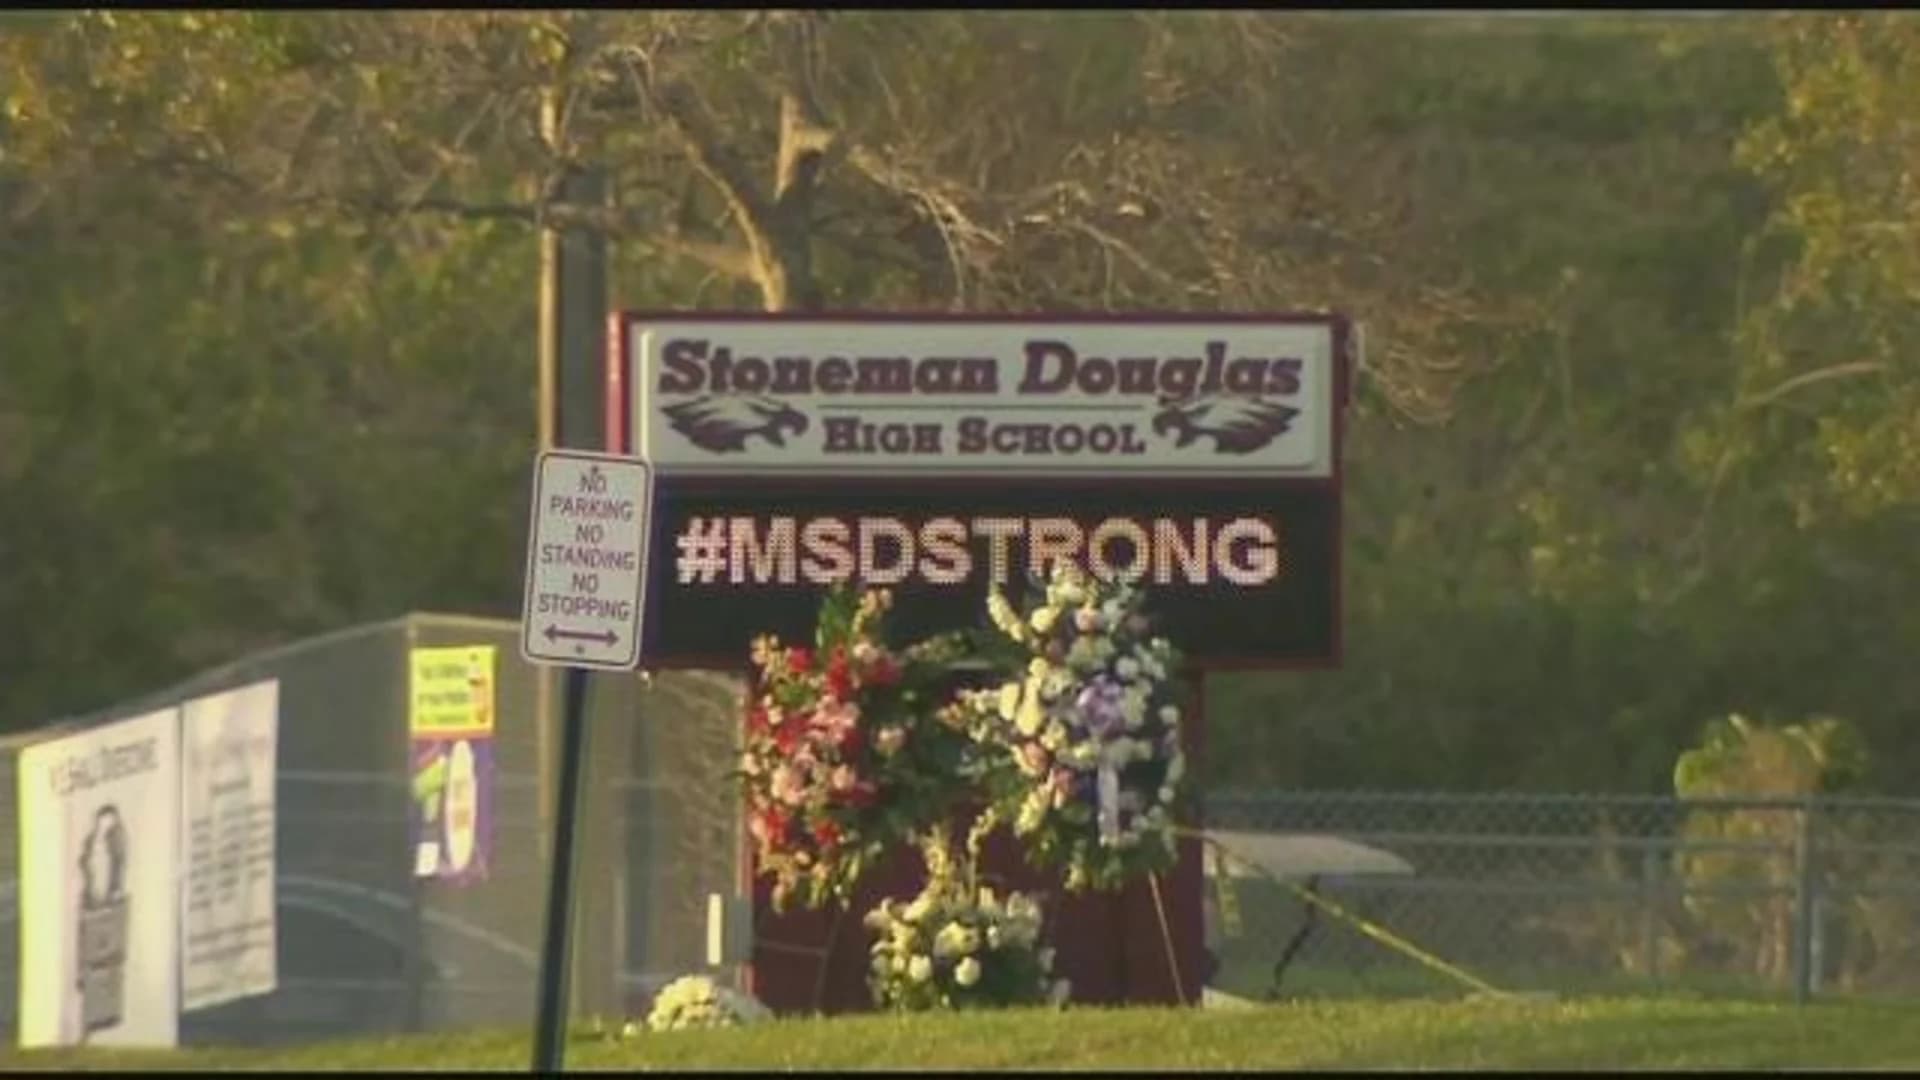 Remembering Parkland 1 year later